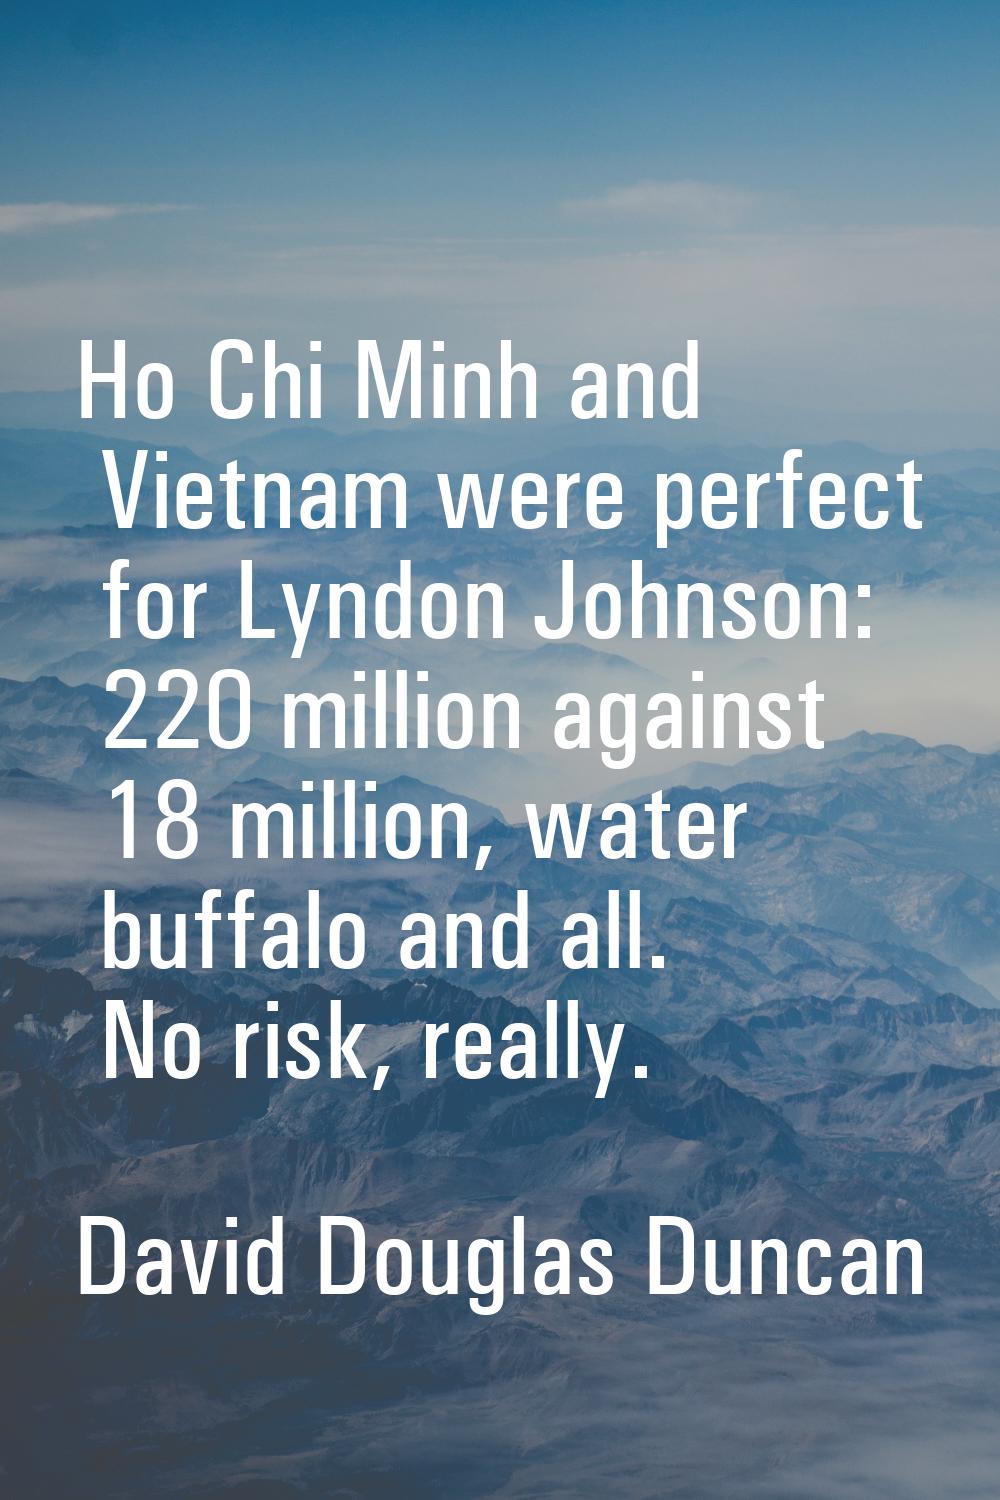 Ho Chi Minh and Vietnam were perfect for Lyndon Johnson: 220 million against 18 million, water buff